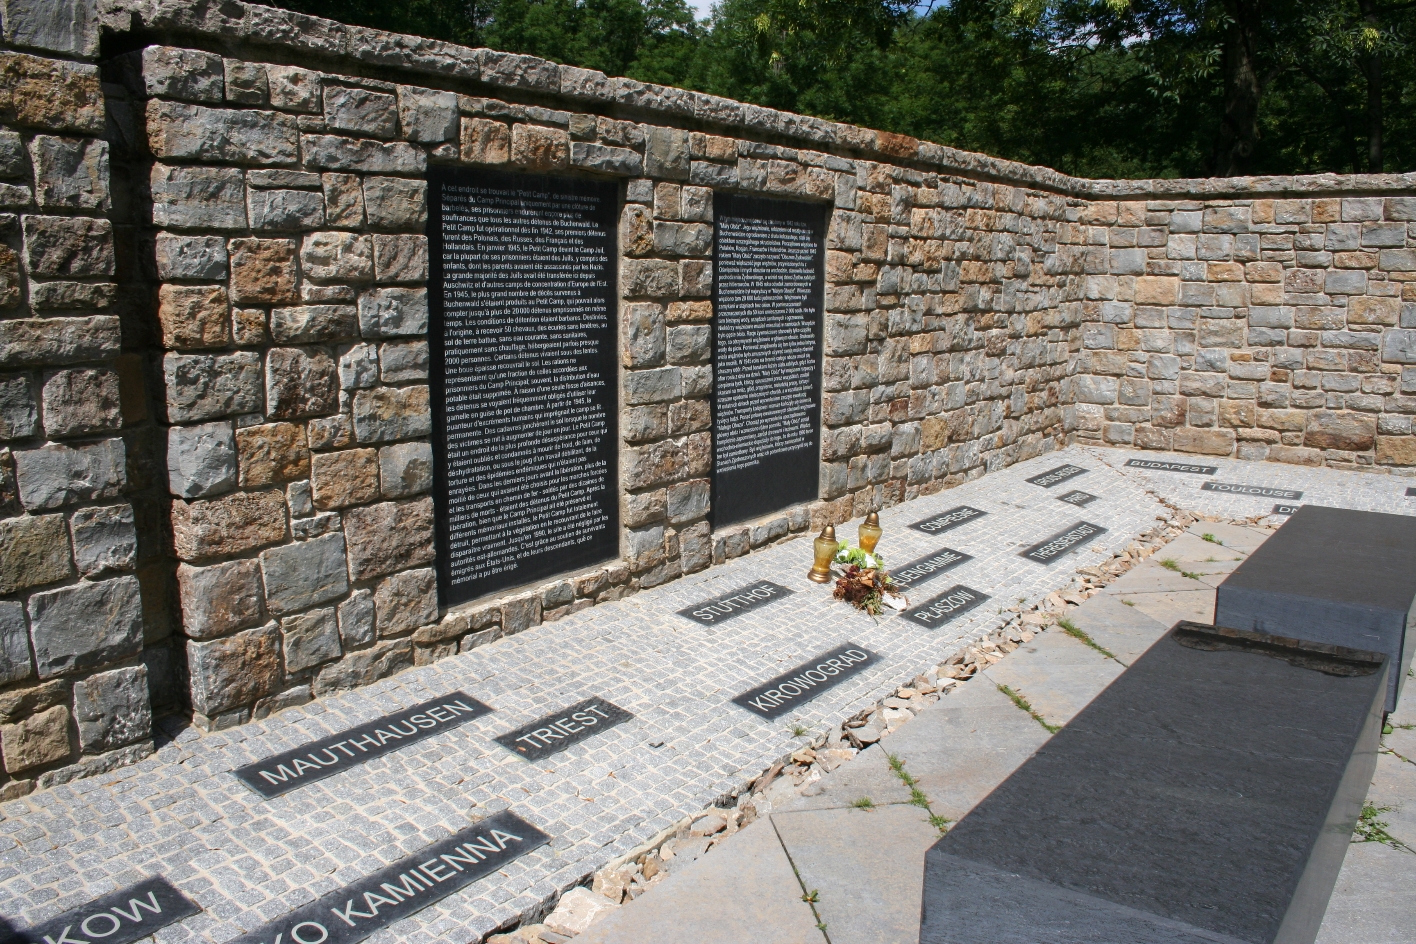 Two densely written black memorial plaques on the wall. In front of them on the floor are smaller black plaques with place names.